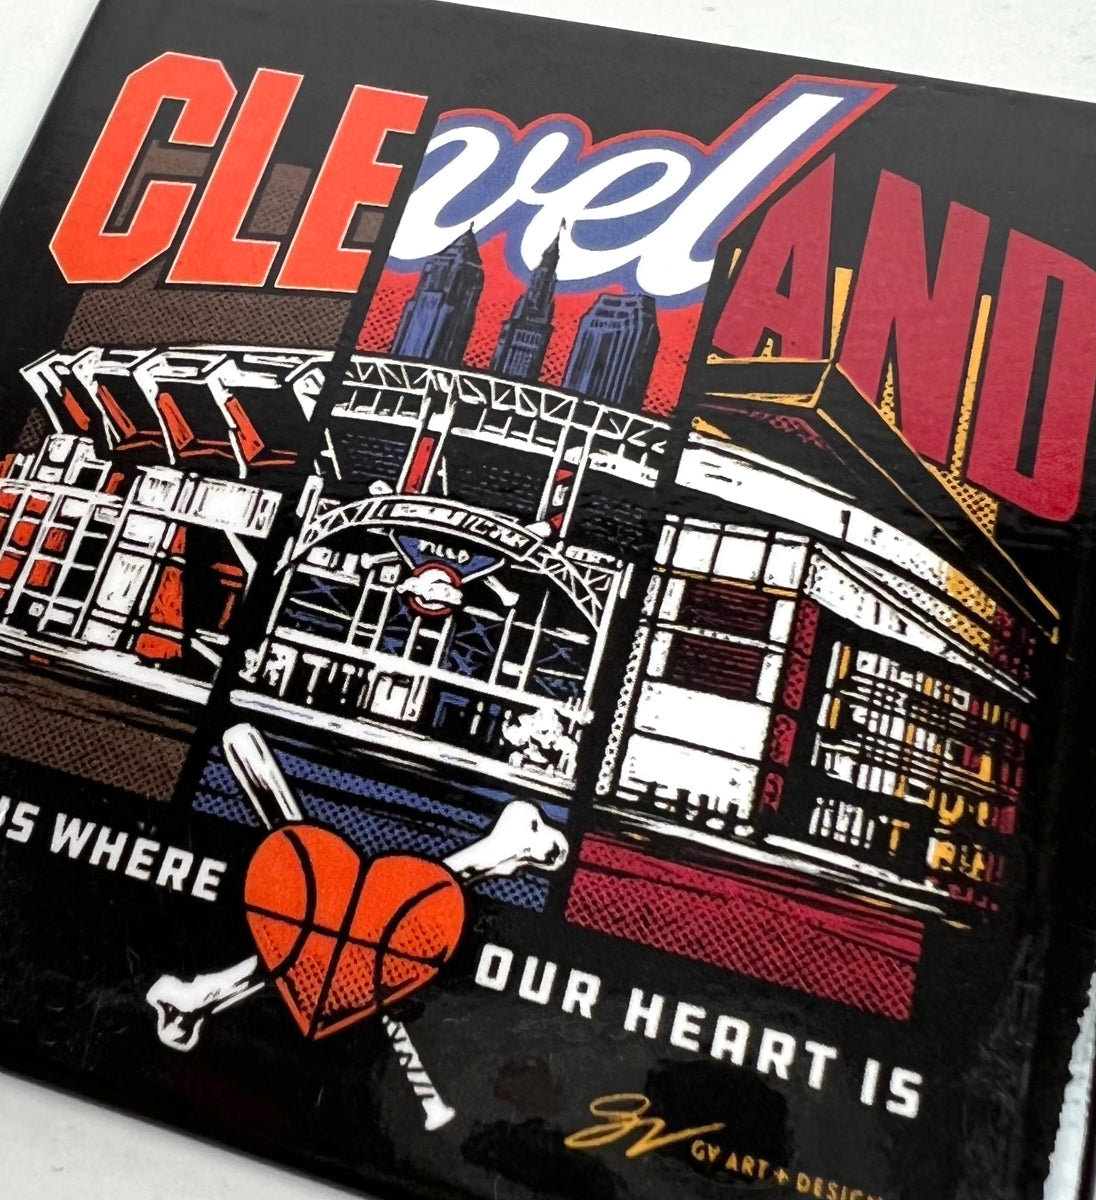 Cleveland Home Is Where Magnet